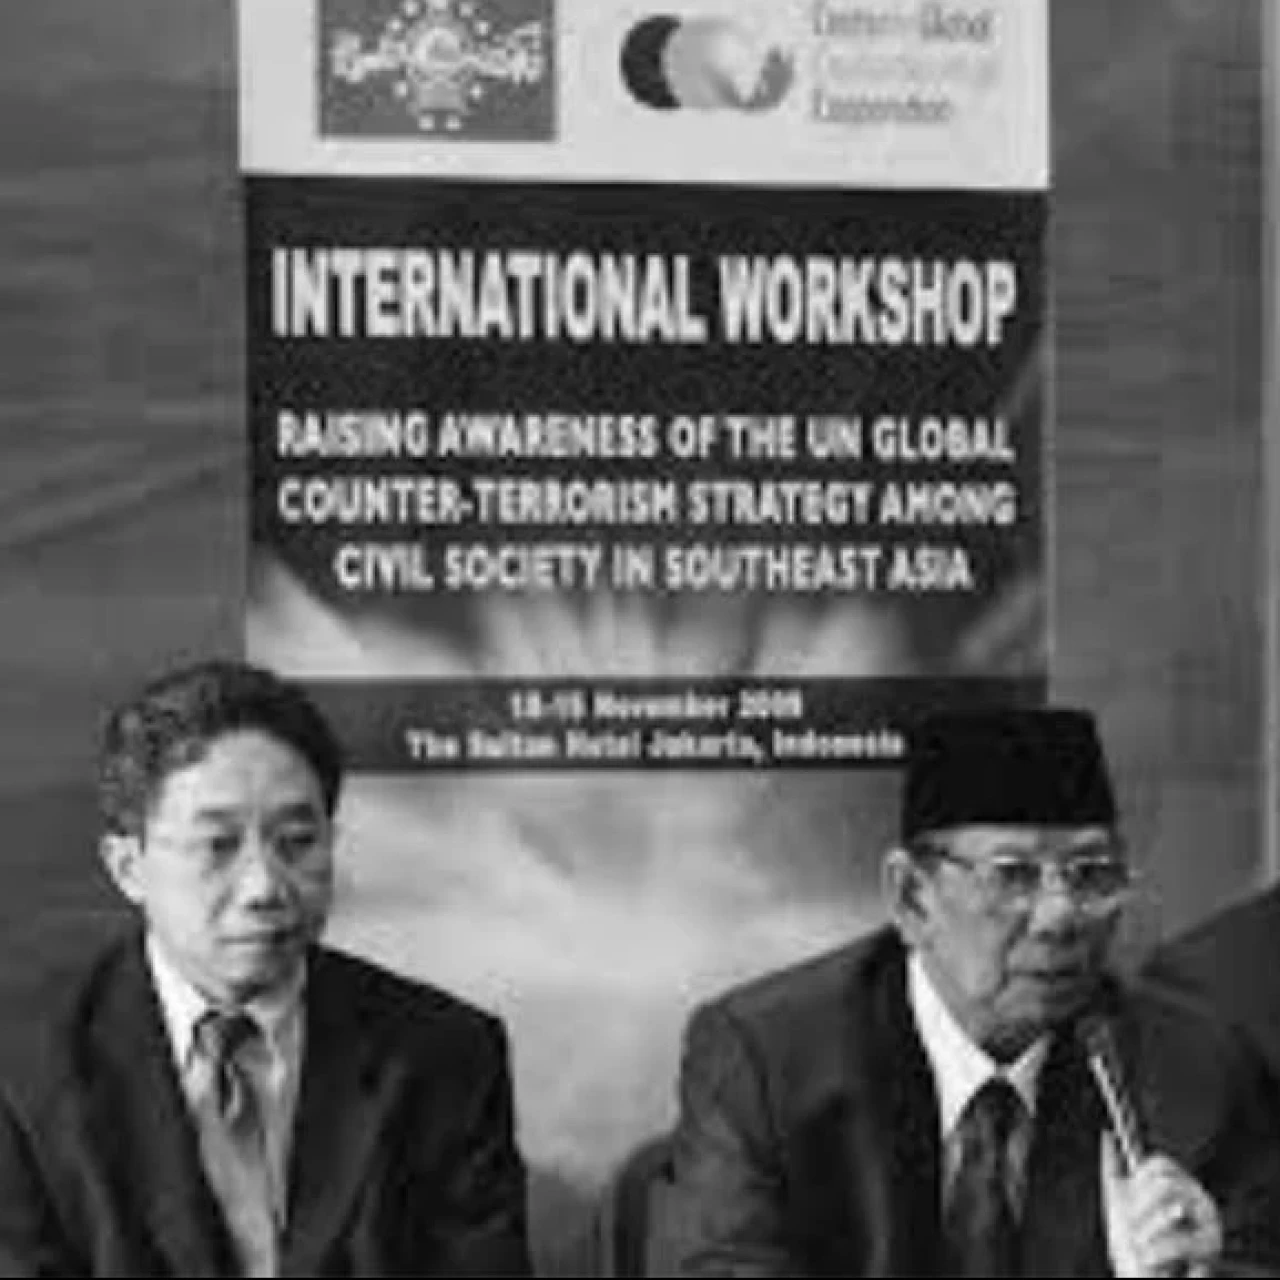 Conclusion and Recomendation from Workshop Raising Awareness of UN Global Counter-Terrorism Strategy among Civil Society in Southeast Asia.